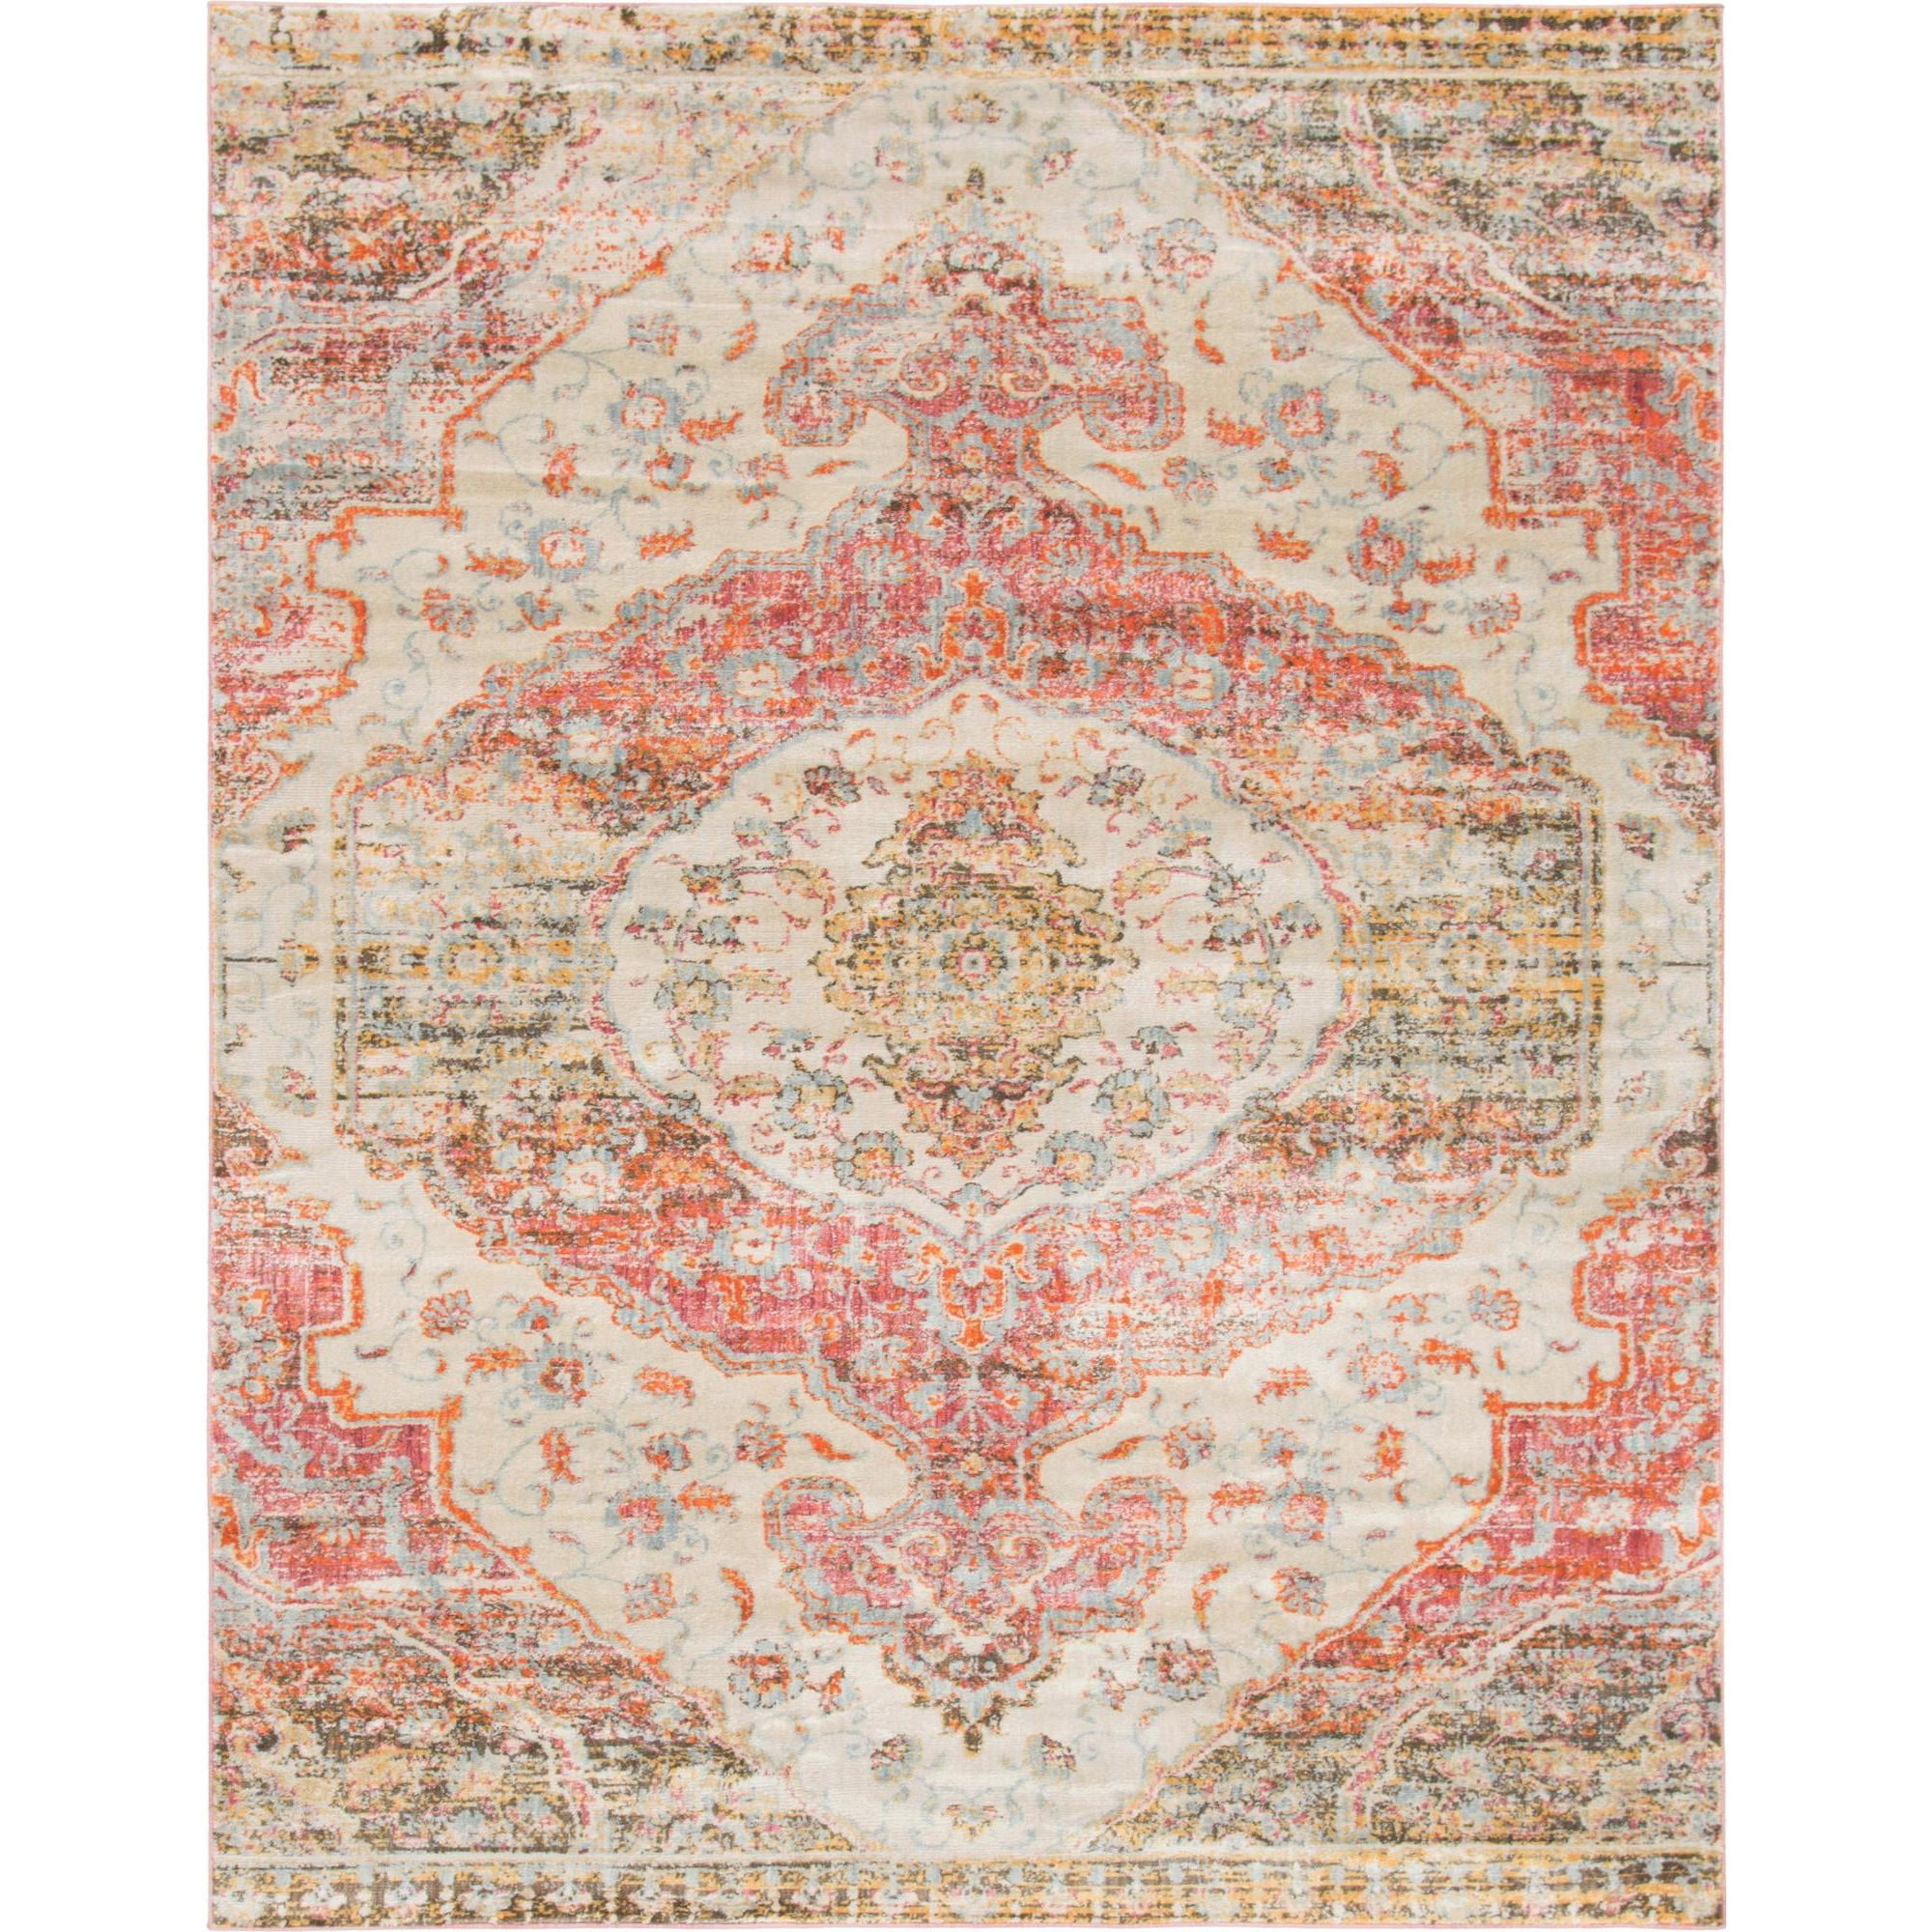 Barrington Gray Updated Traditional Area Rug 6'7 x 9'6